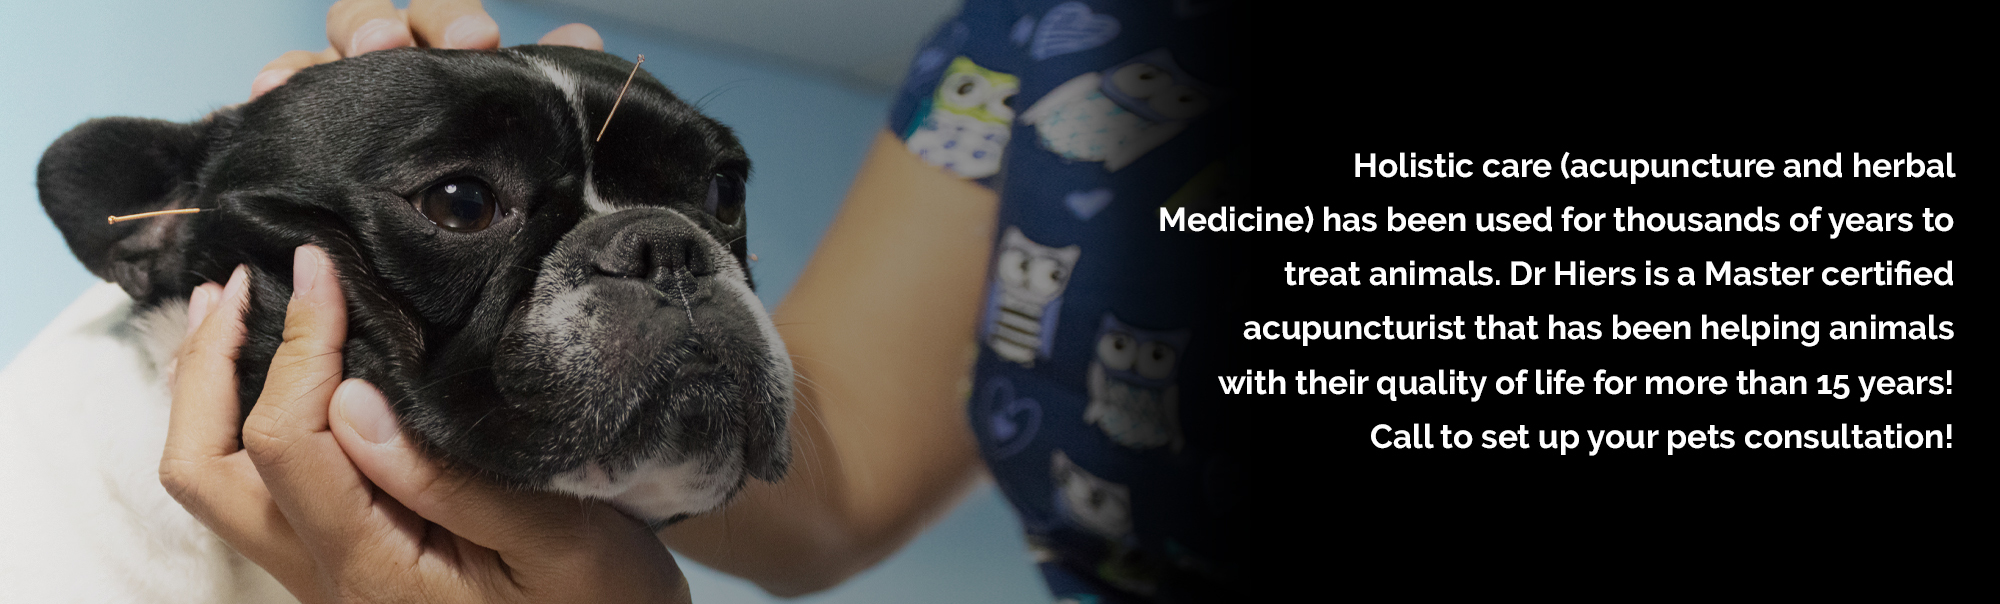 Holistic Care (acupuncture and herbal medicine) has been used for thousands of years to treat animals.  Dr Hiers is a Master certified acupuncturist that has been helping animals with their quality of life for more than 15 years! 